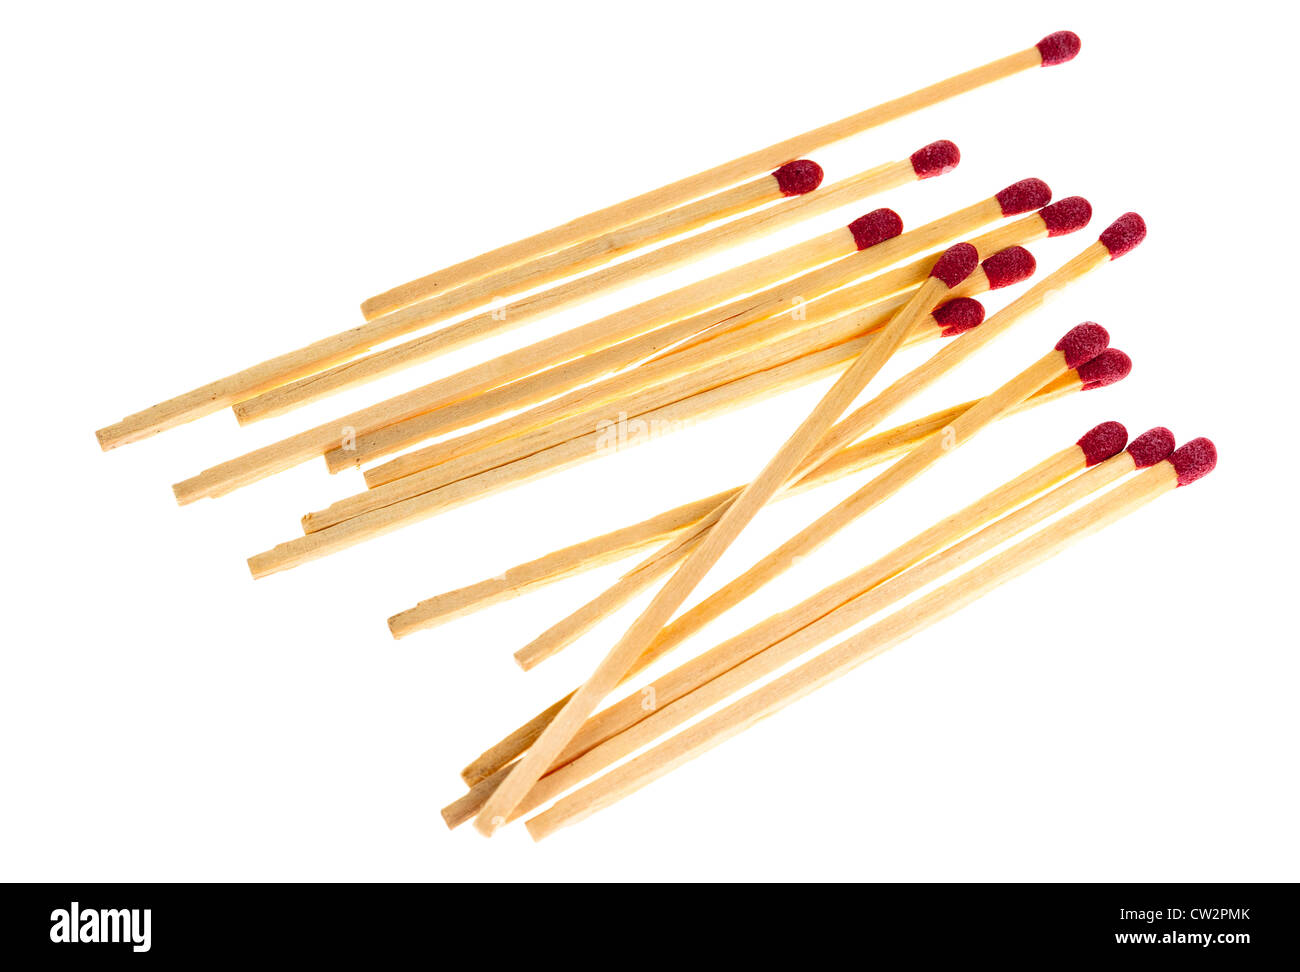 Long red matches coated in phosphorus, UK Stock Photo